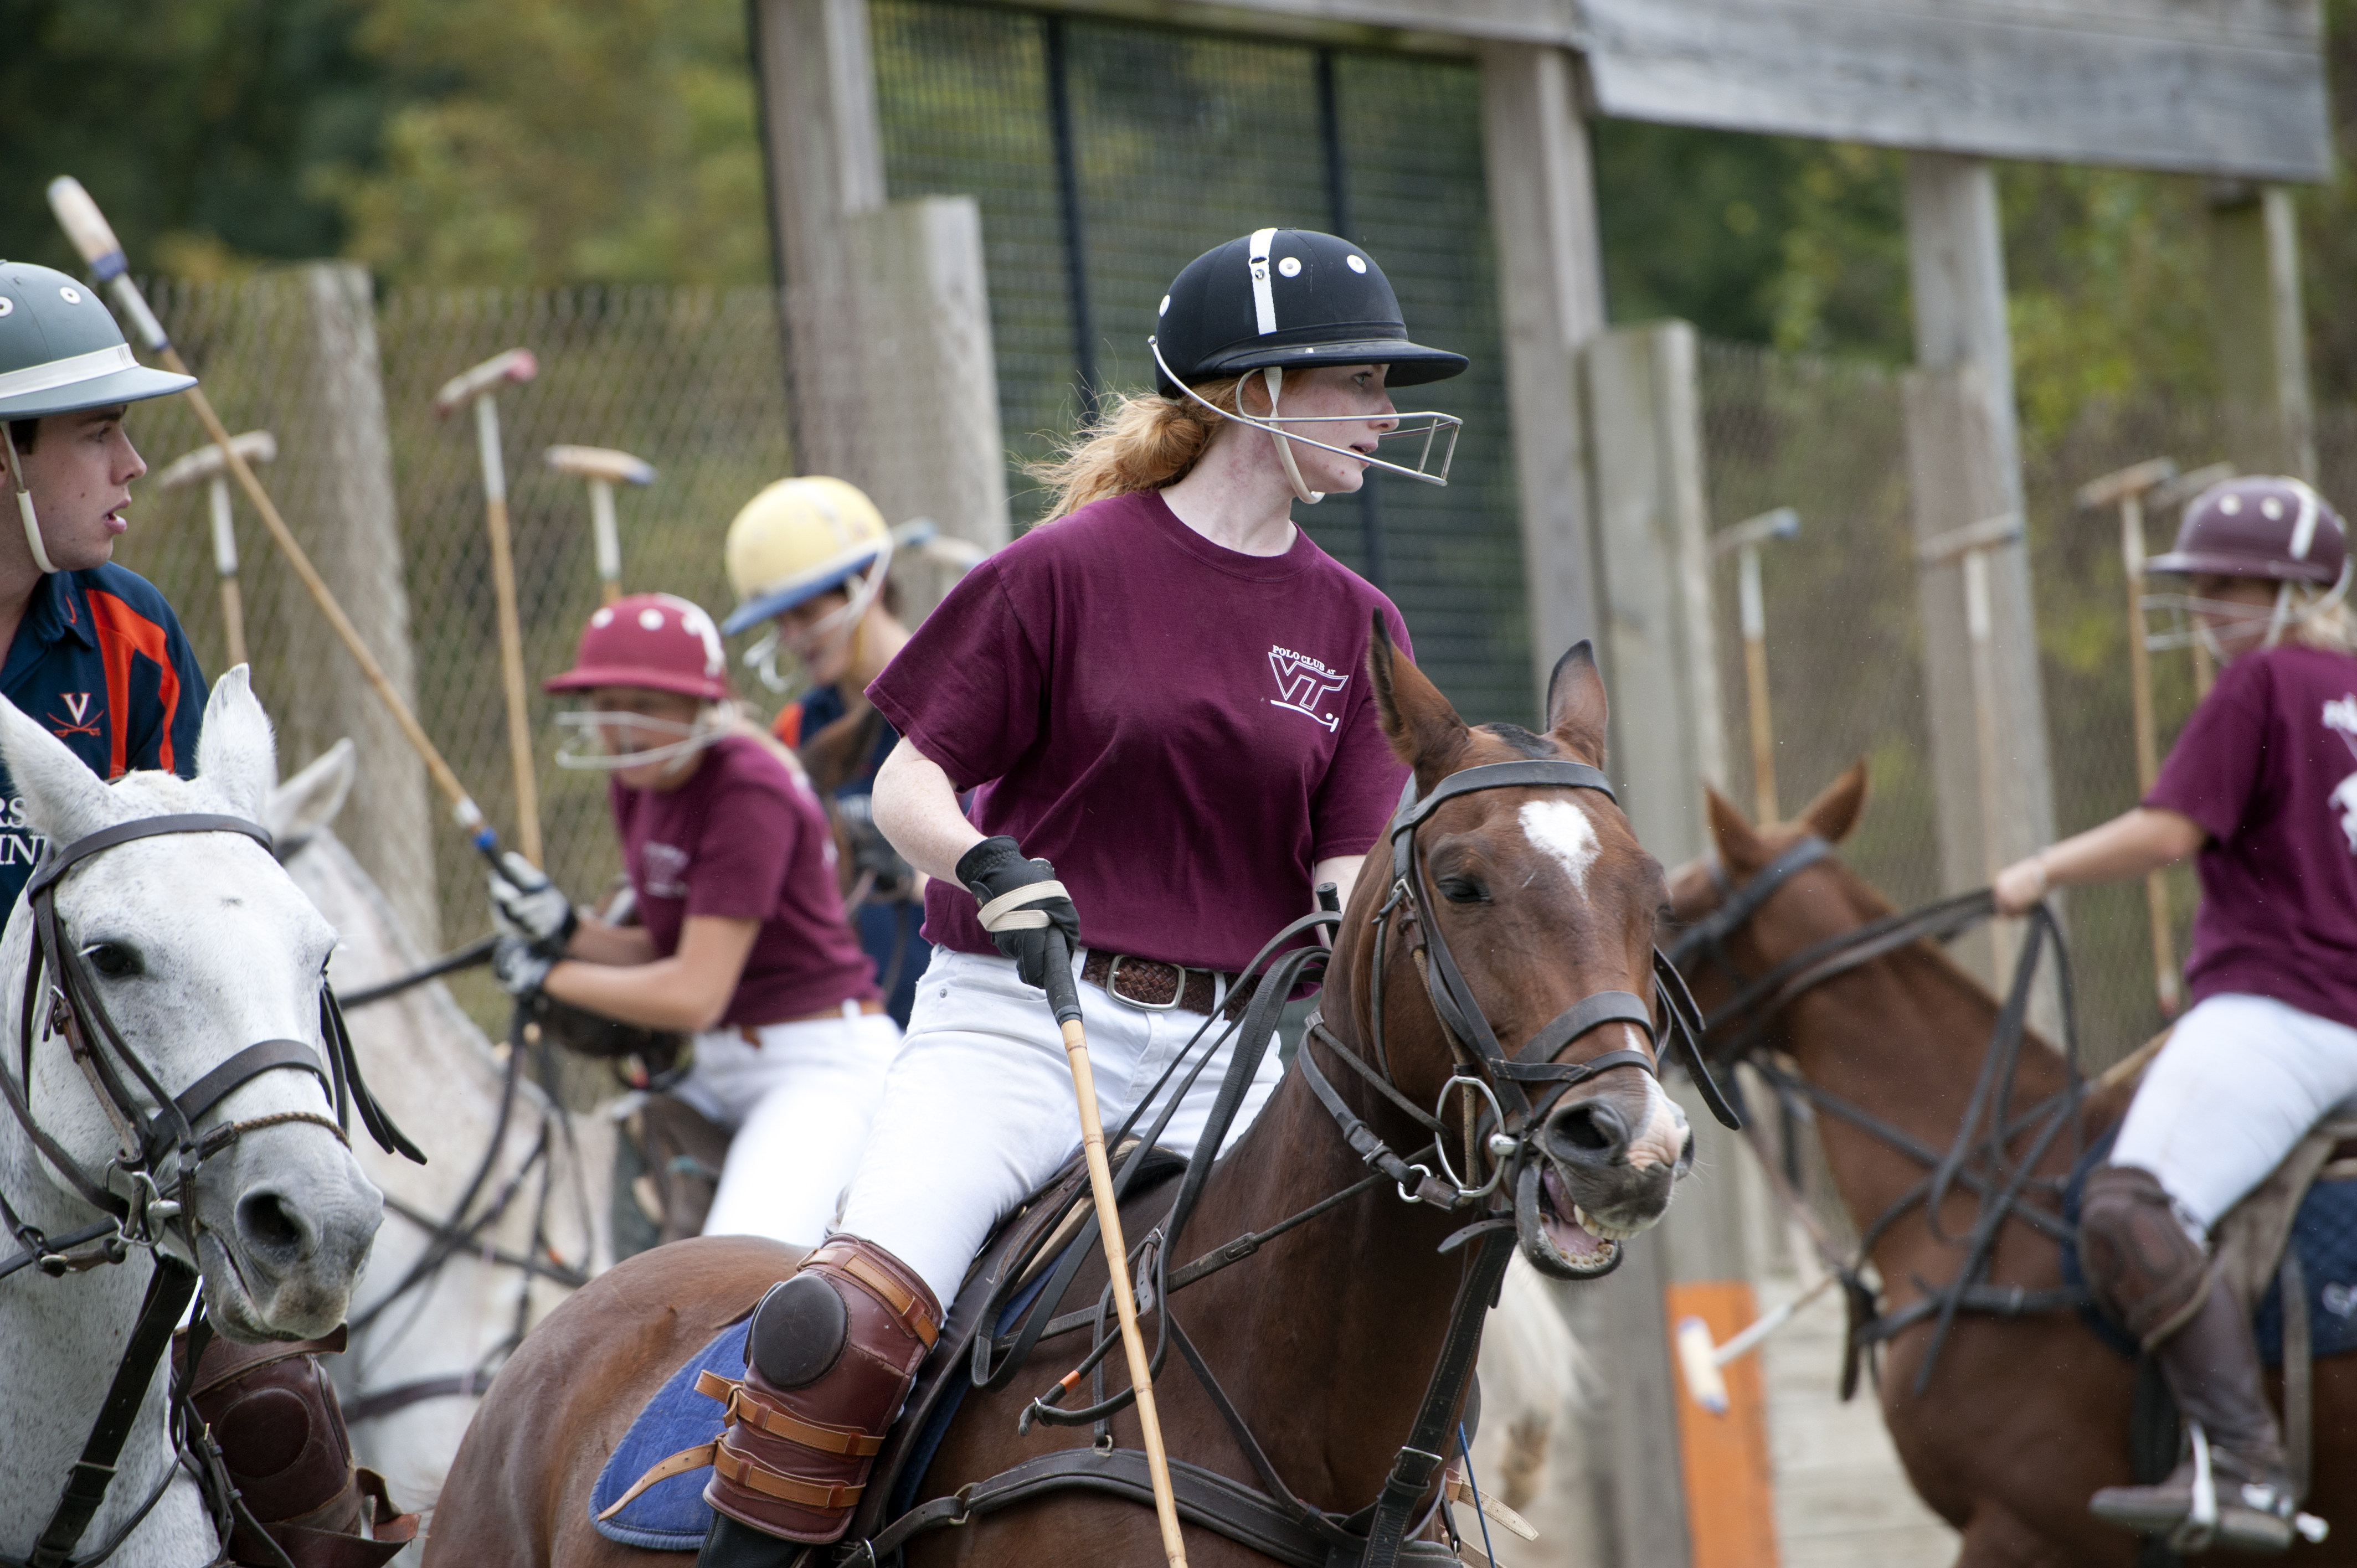 Carolin Neville, a member of the Polo at Virginia Tech team, rides a University of Virginia horse in a game at the Charlottesville campus. The guest team always uses some of the home team's horses. 